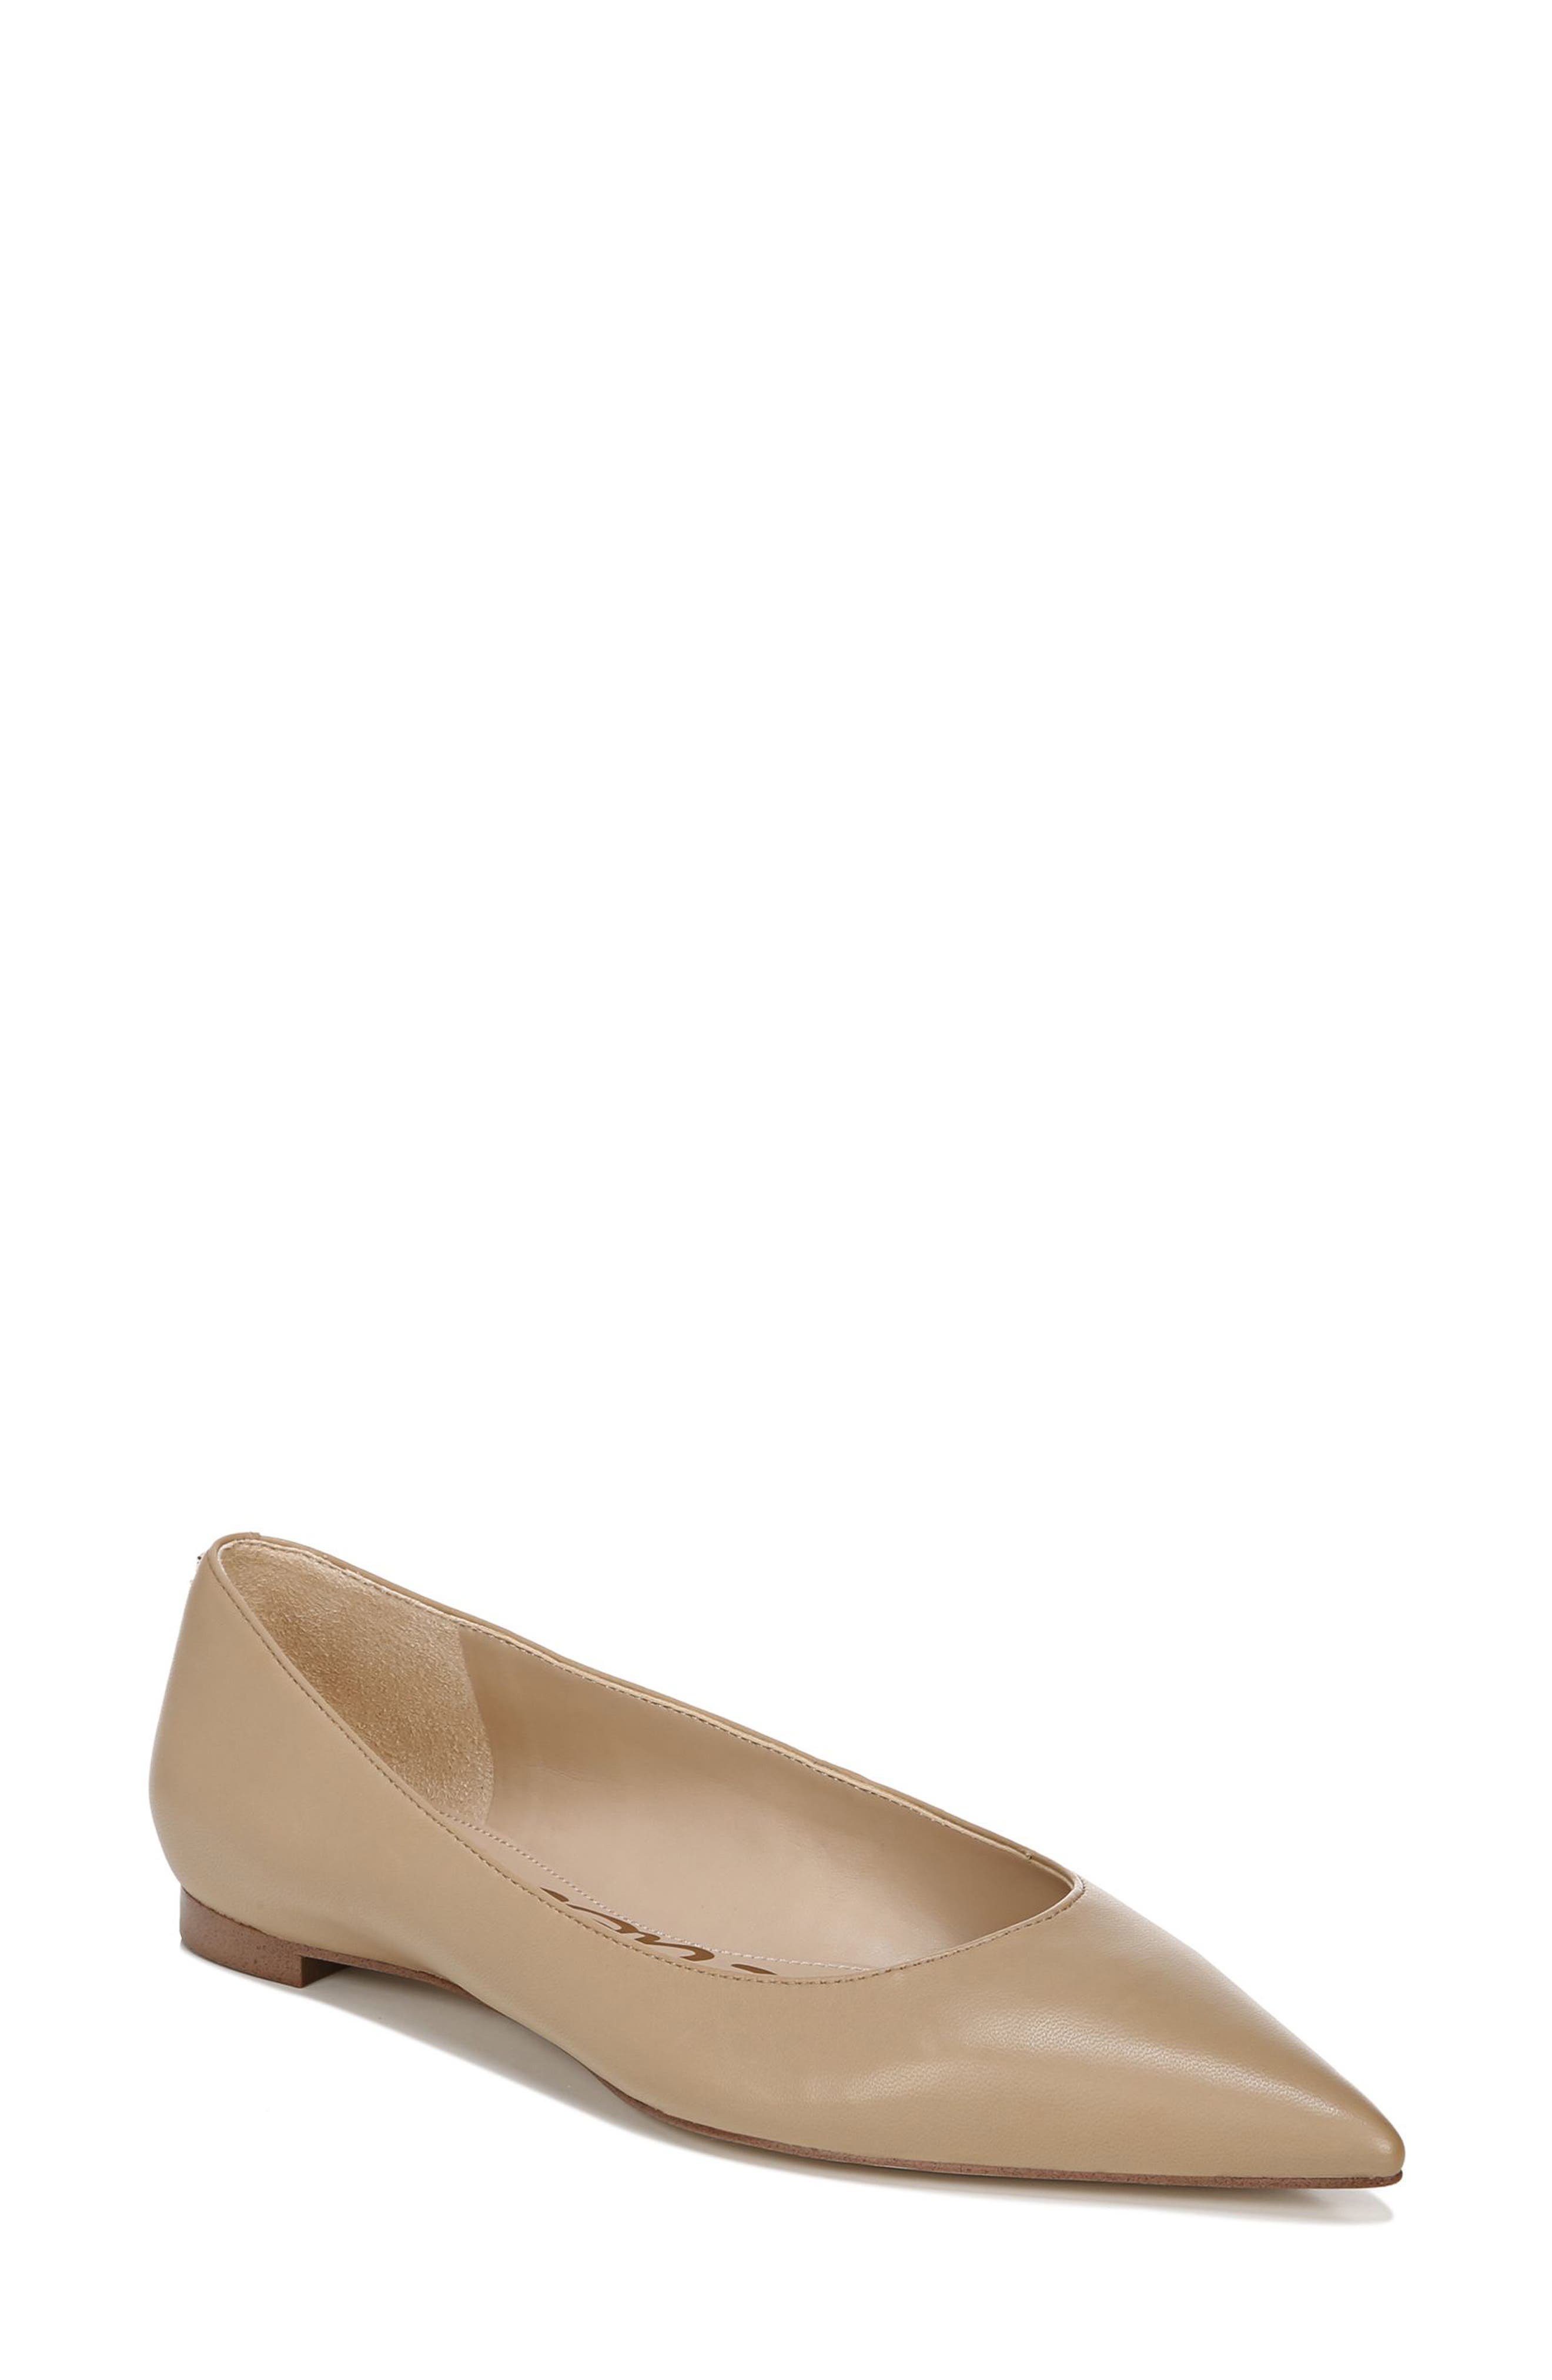 pointed toe flats size 5